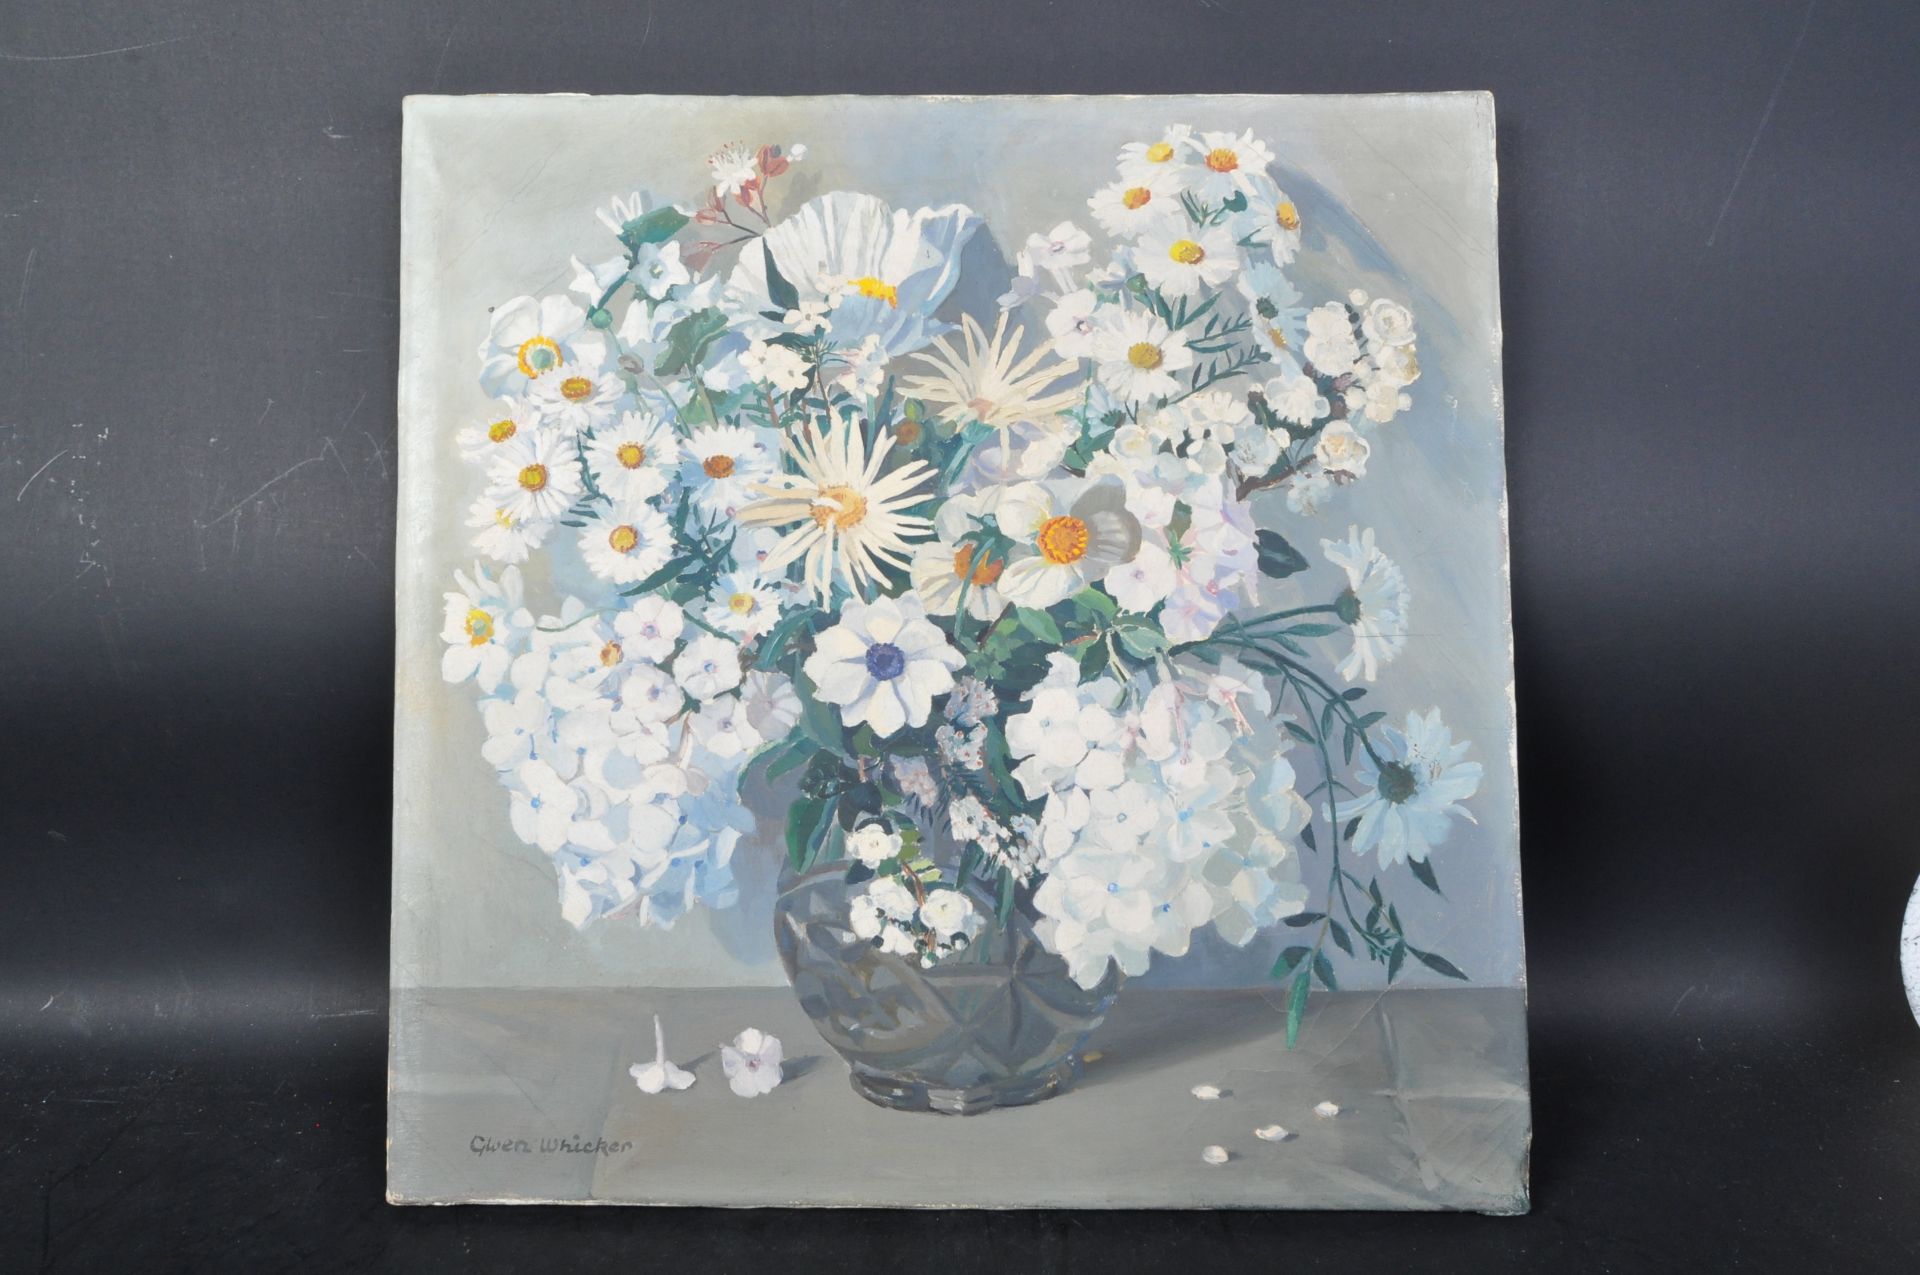 GWEN WICKER - 20TH C. 'WHITE FLOWERS' OIL ON CANVAS PAINTING